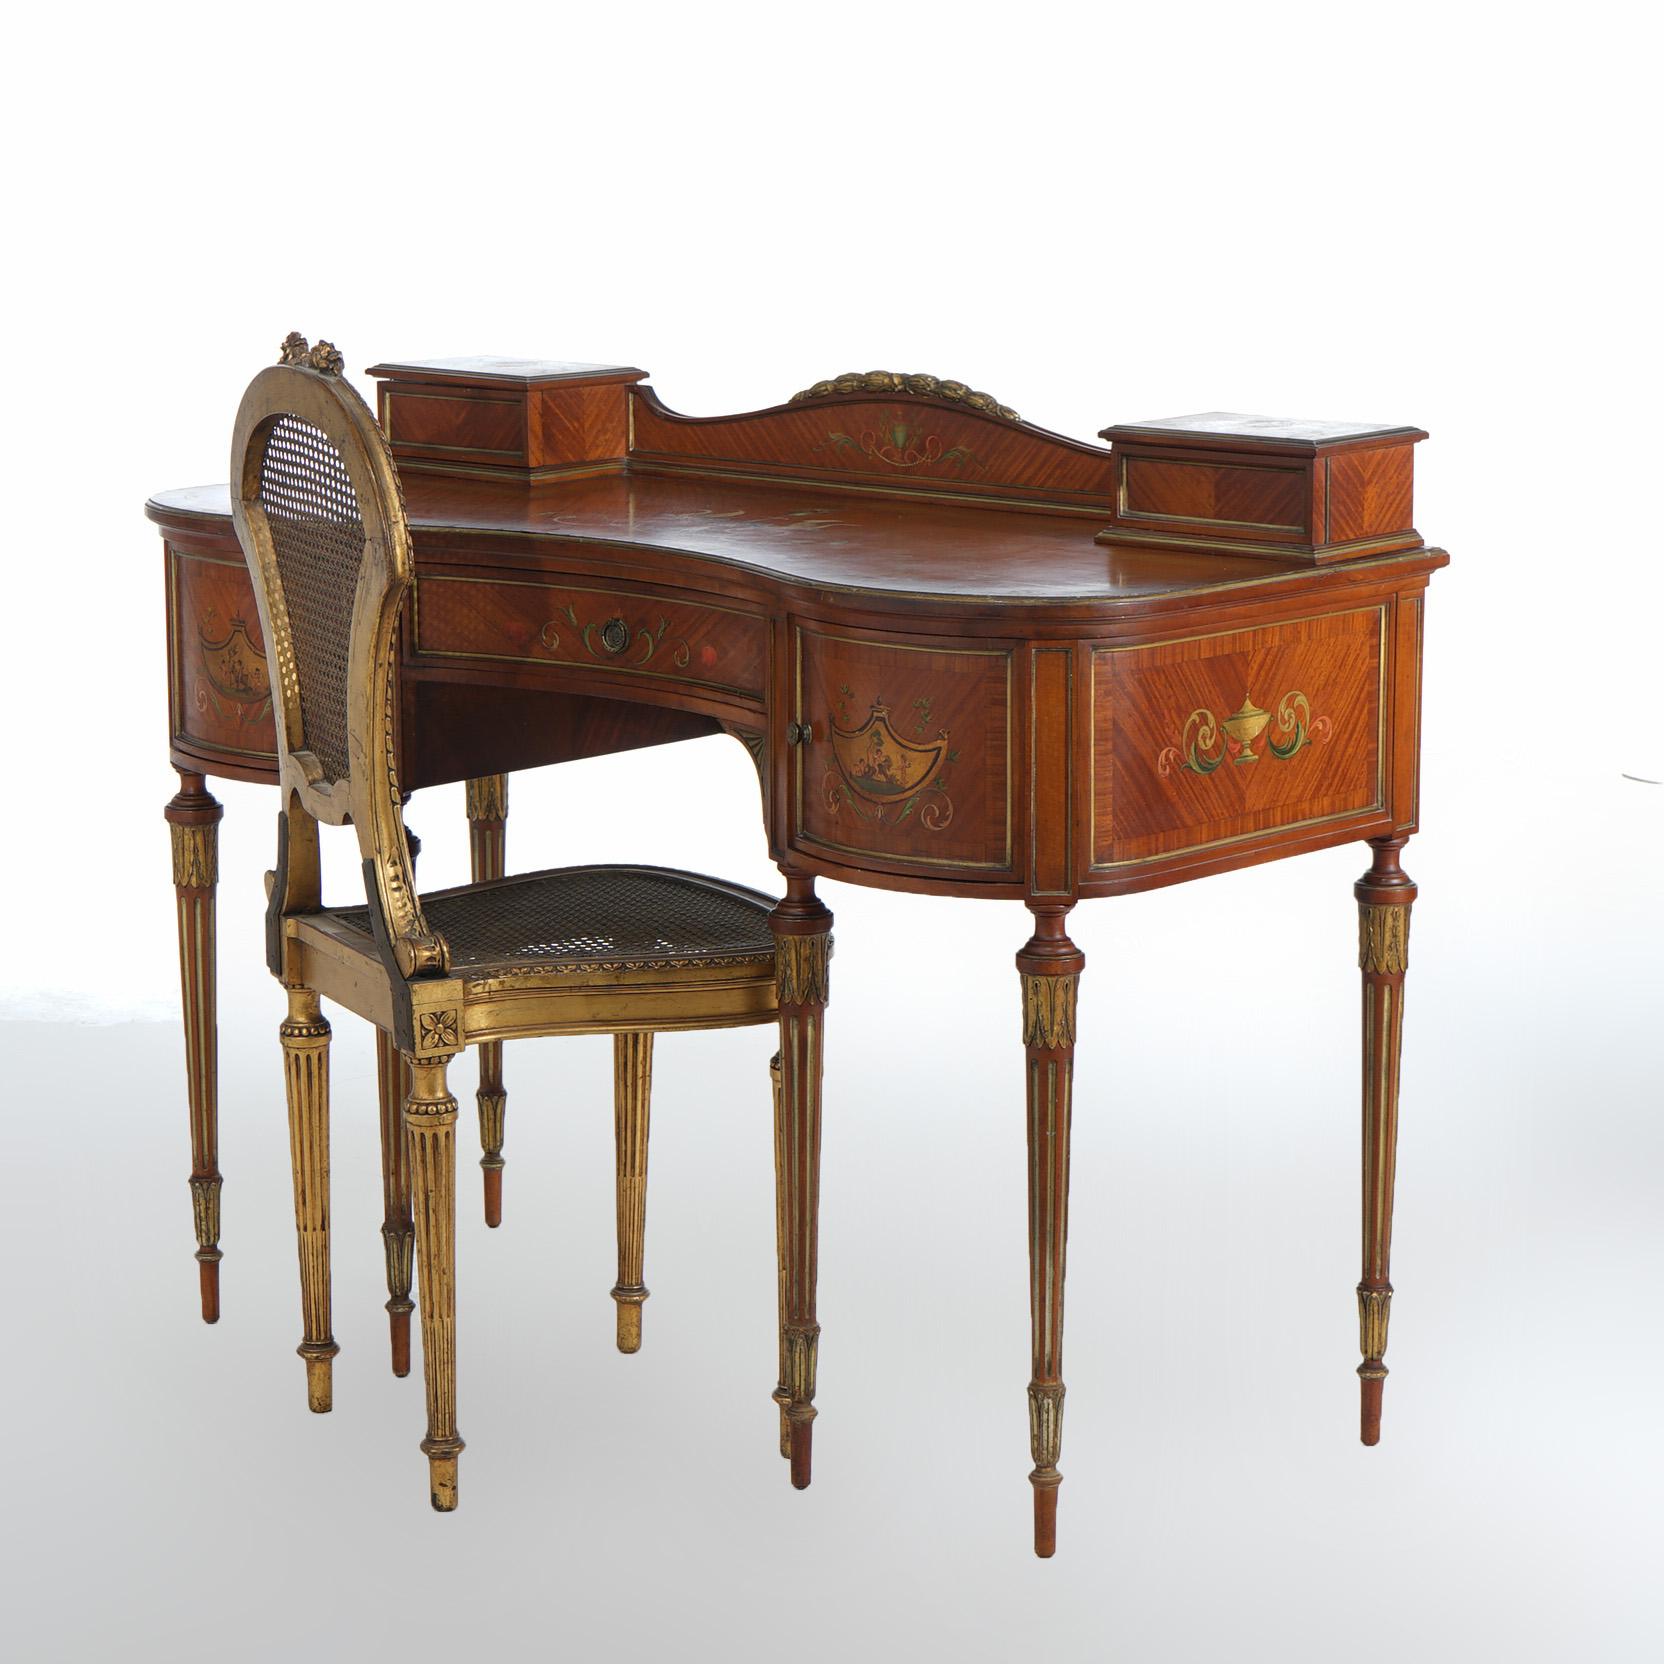 Antique French Style Adams Decorated Satinwood Vanity & Chair Circa 1900 30